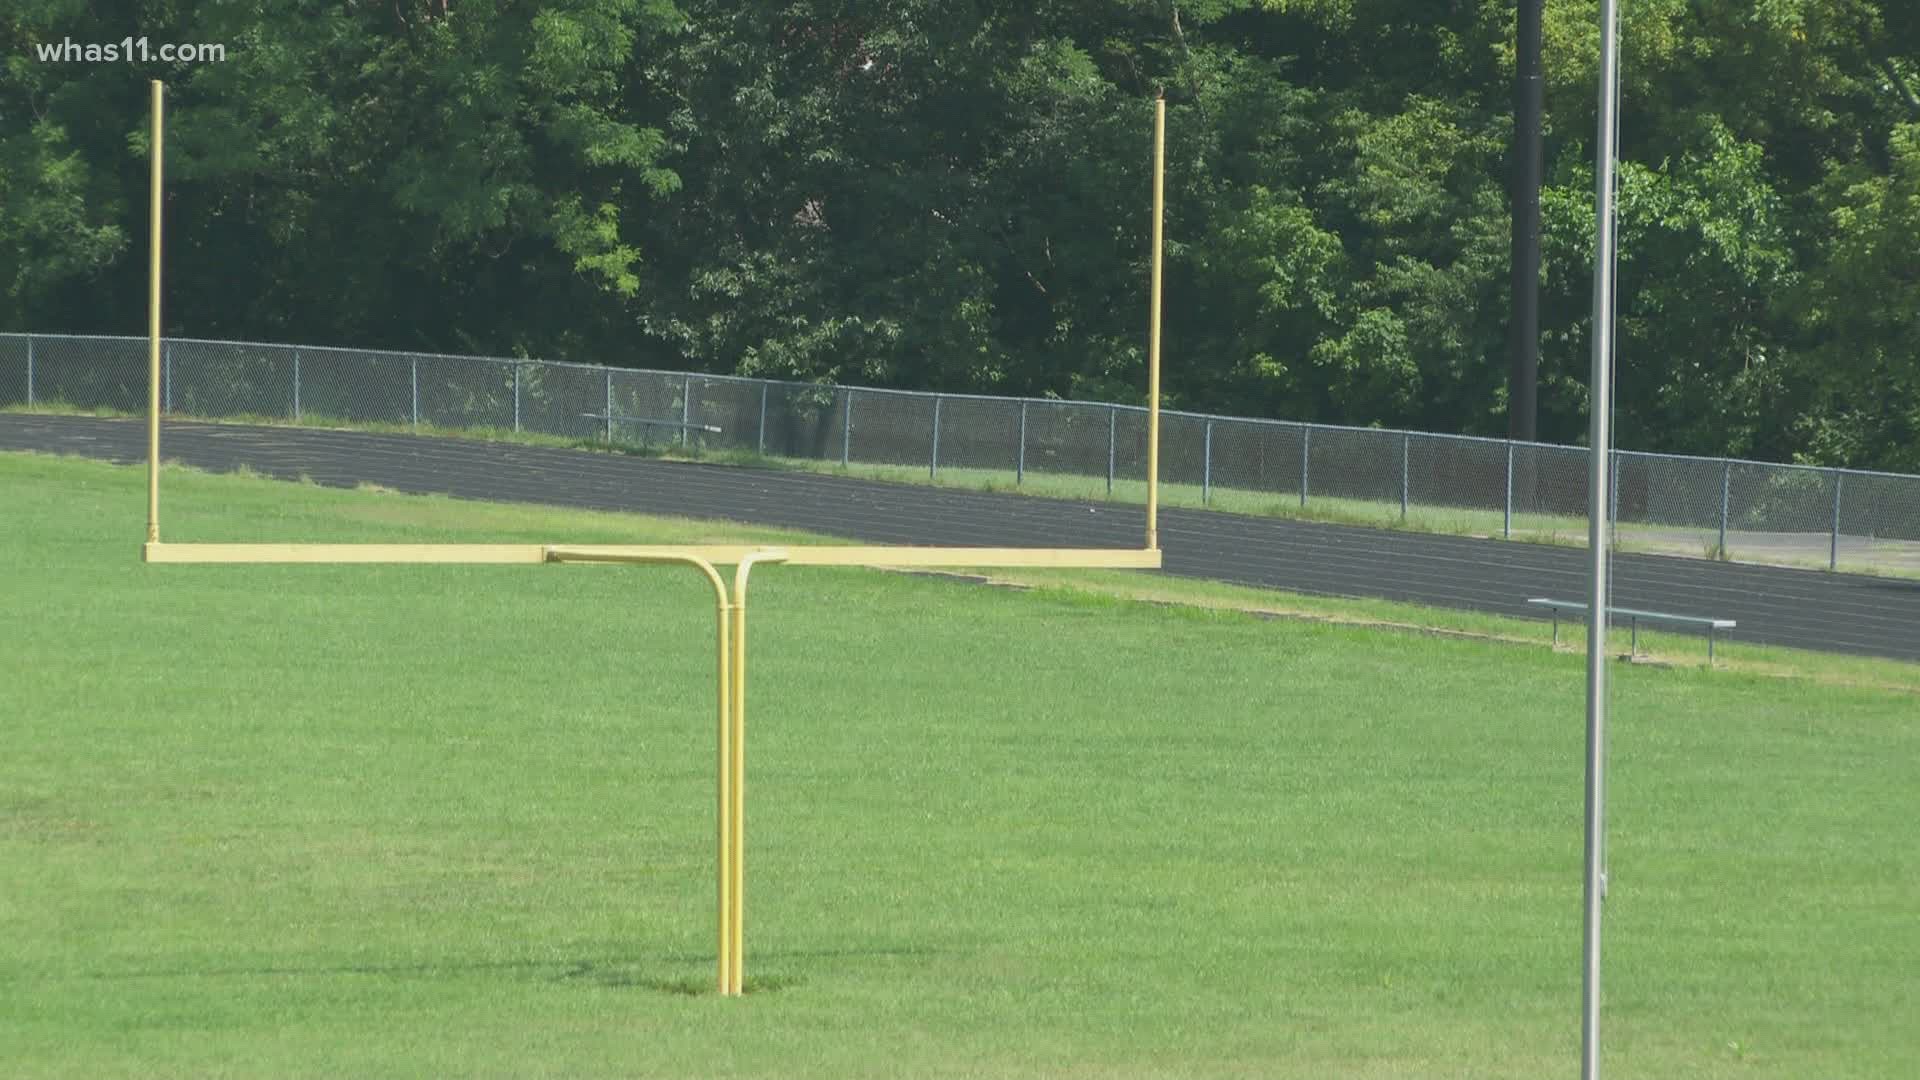 A Southern Indiana youth football league is canceling this year's season because of coronavirus concerns.